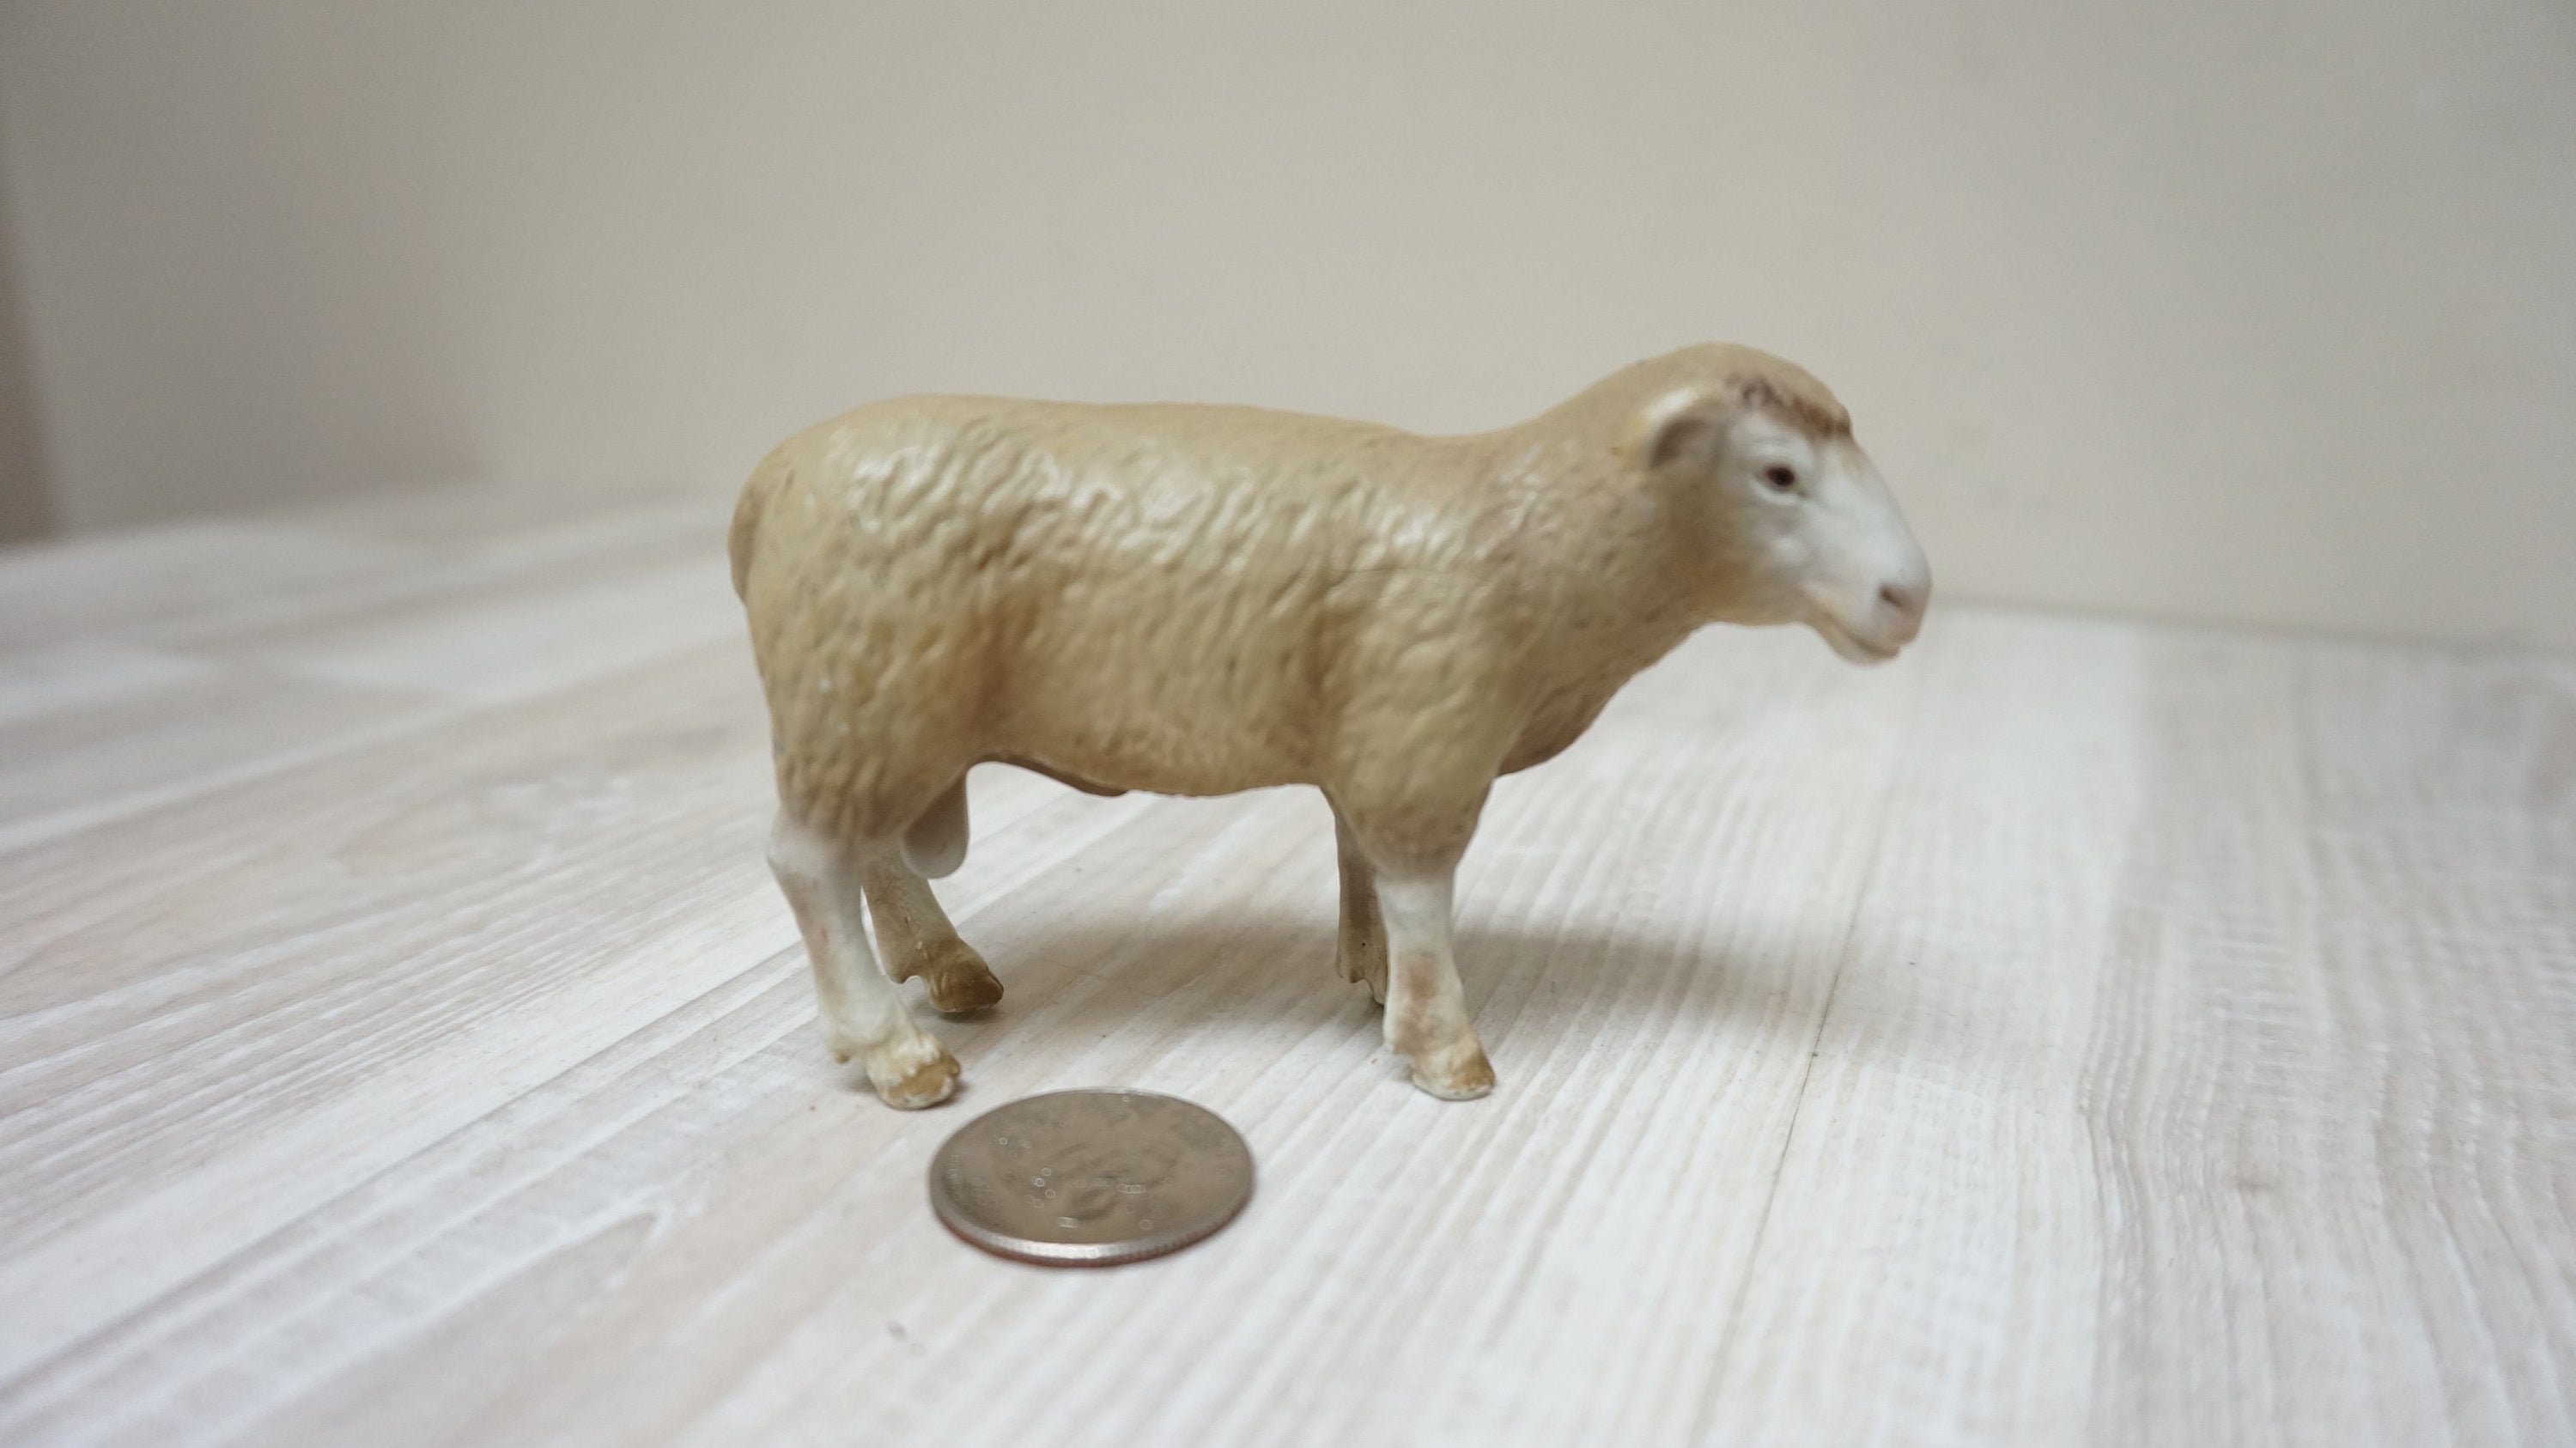 Schleich 13266 Ram - Sheep Farm Life 2002 Retired Animal Figurine Toy Hard Rubber Plastic Made in Germany Figure Realistic Vintage Country